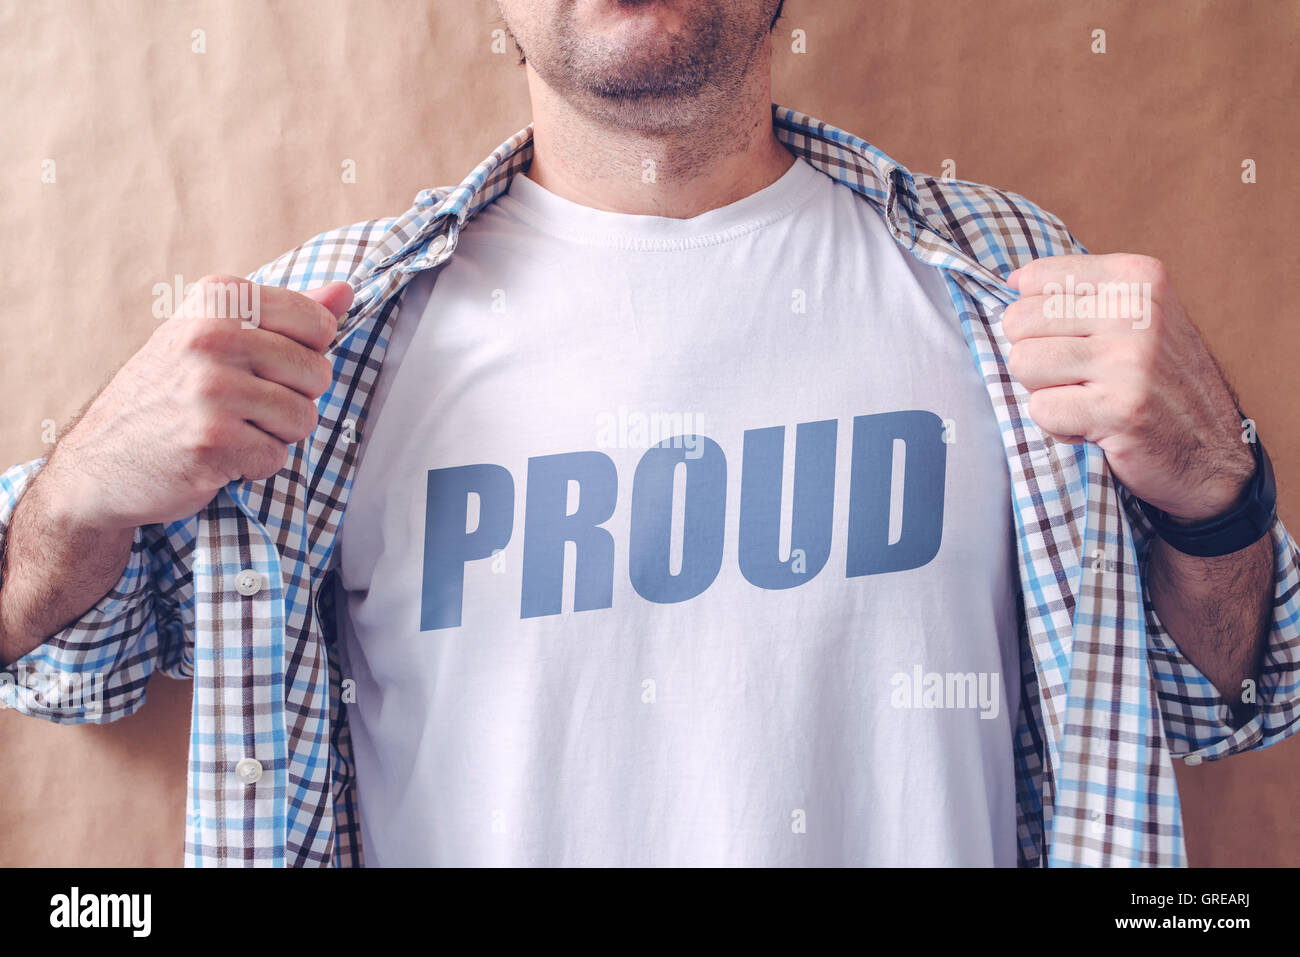 Guy revealing his shirt with proud title, pride and arrogance concept. Stock Photo